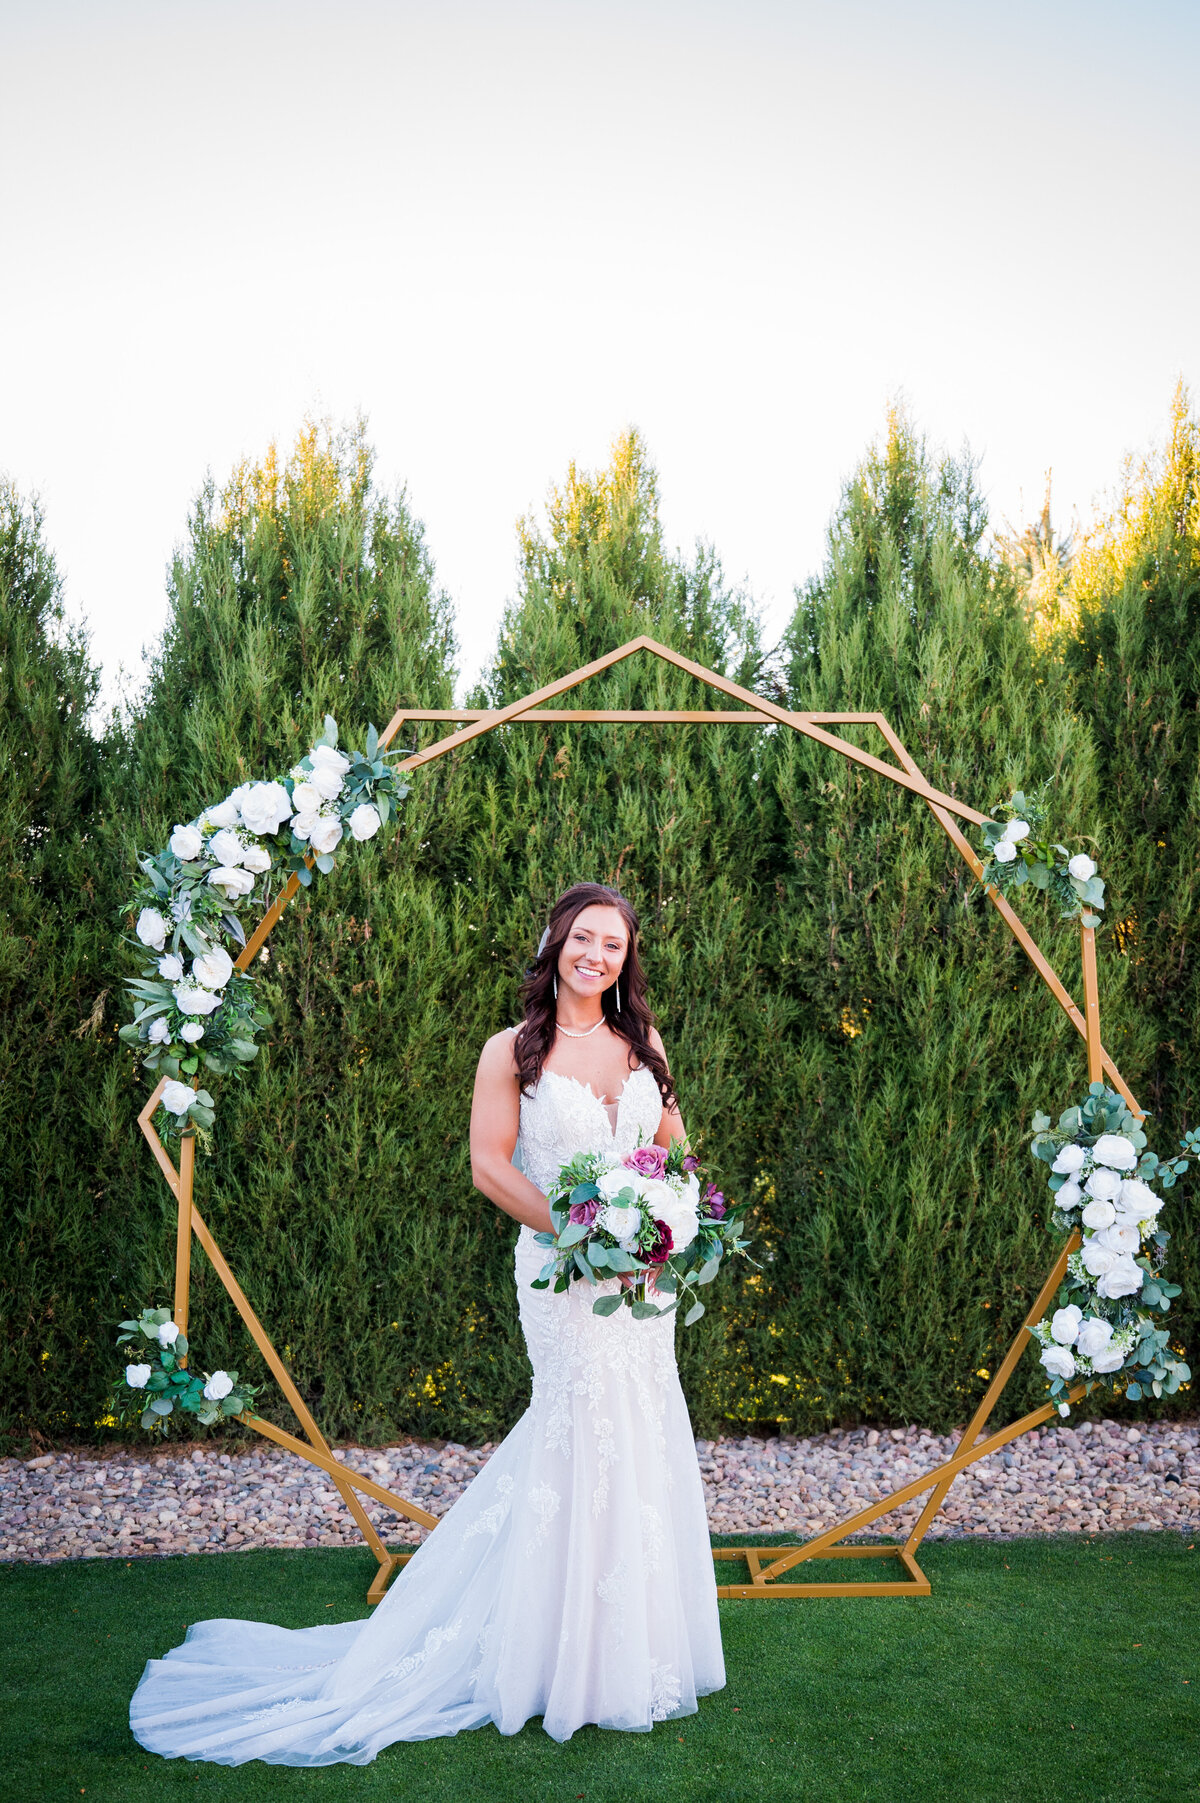 A bride smiles at the camera, standing in front of her wedding arch and her Colorado wedding venue.